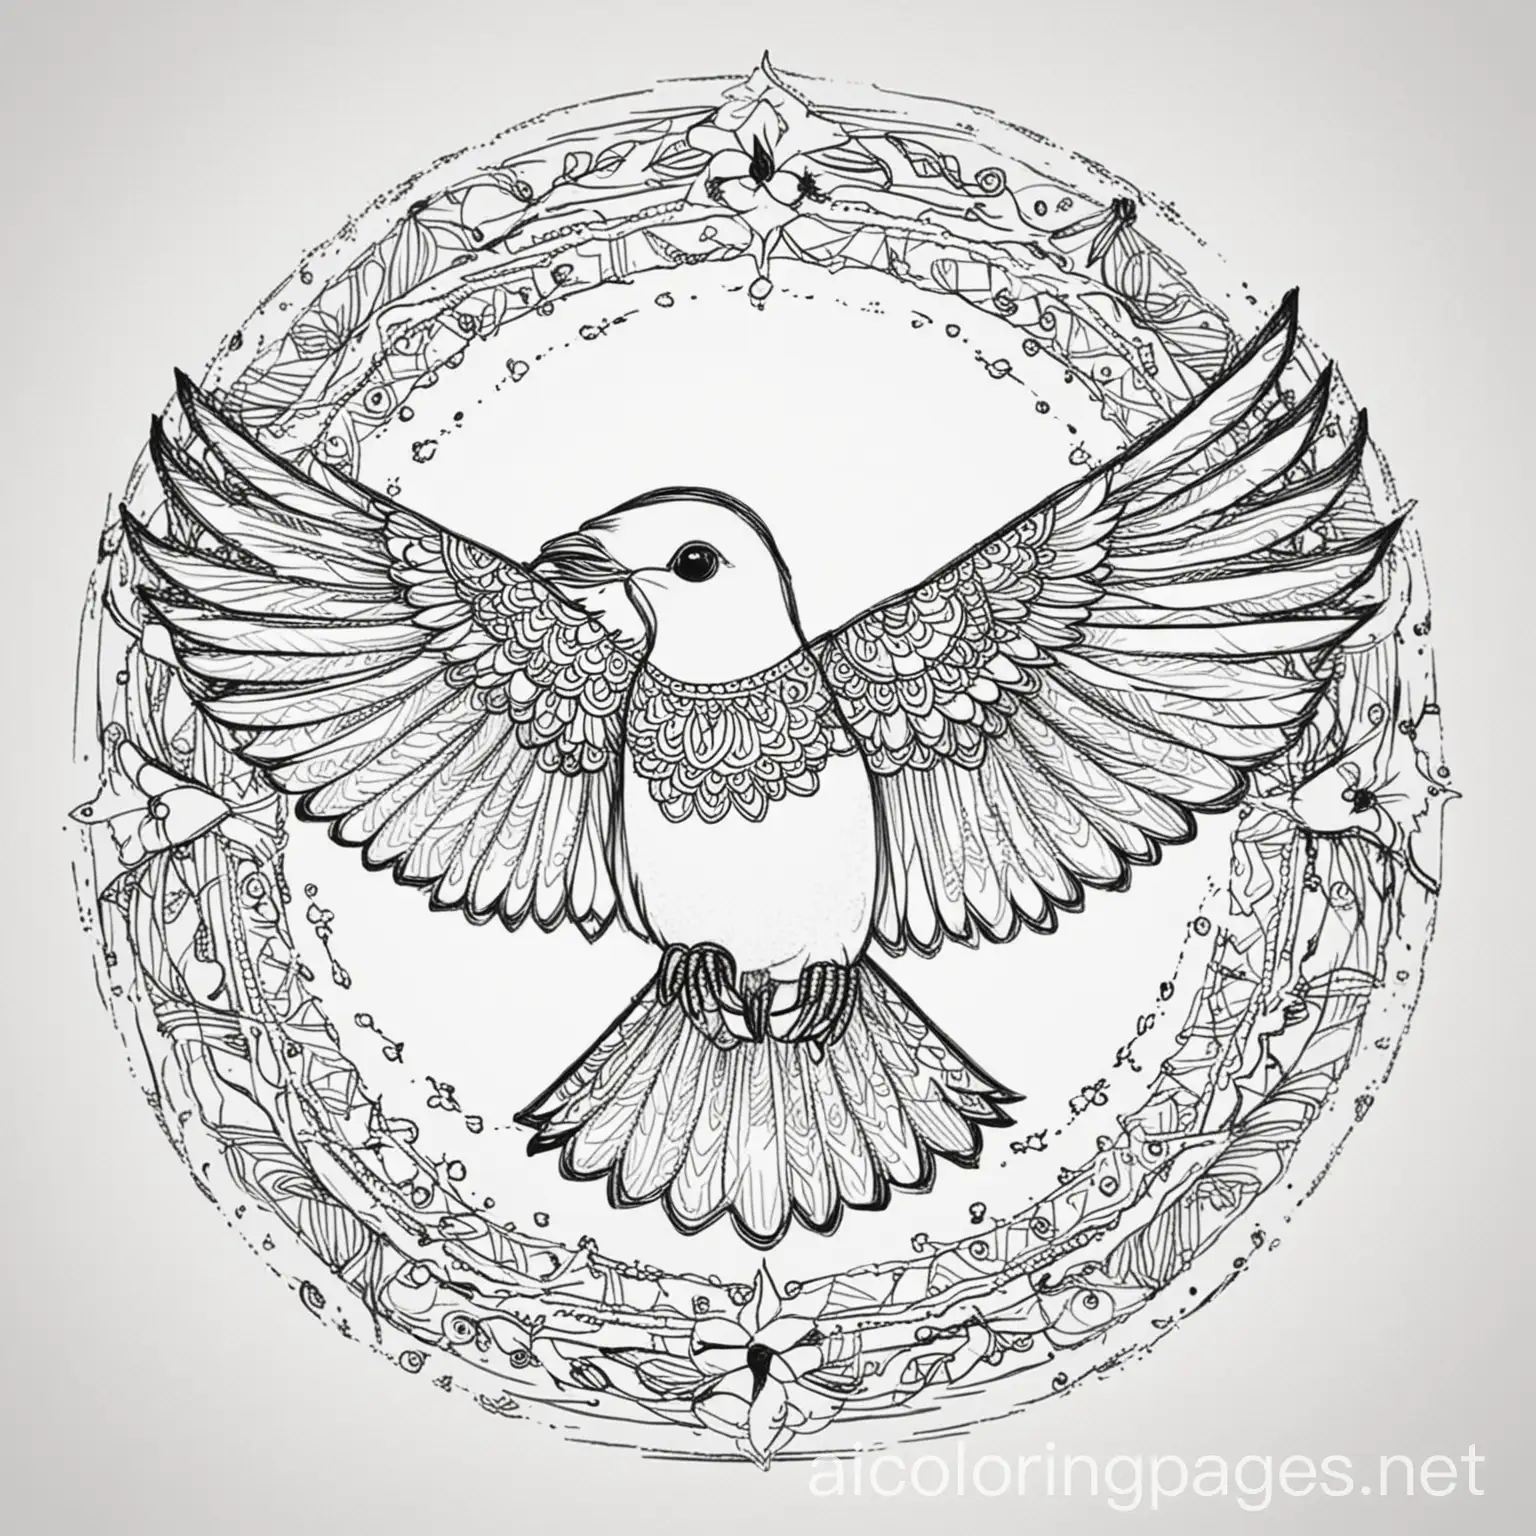 Flying-Bird-Mandala-Coloring-Page-for-Kids-Black-and-White-Line-Art